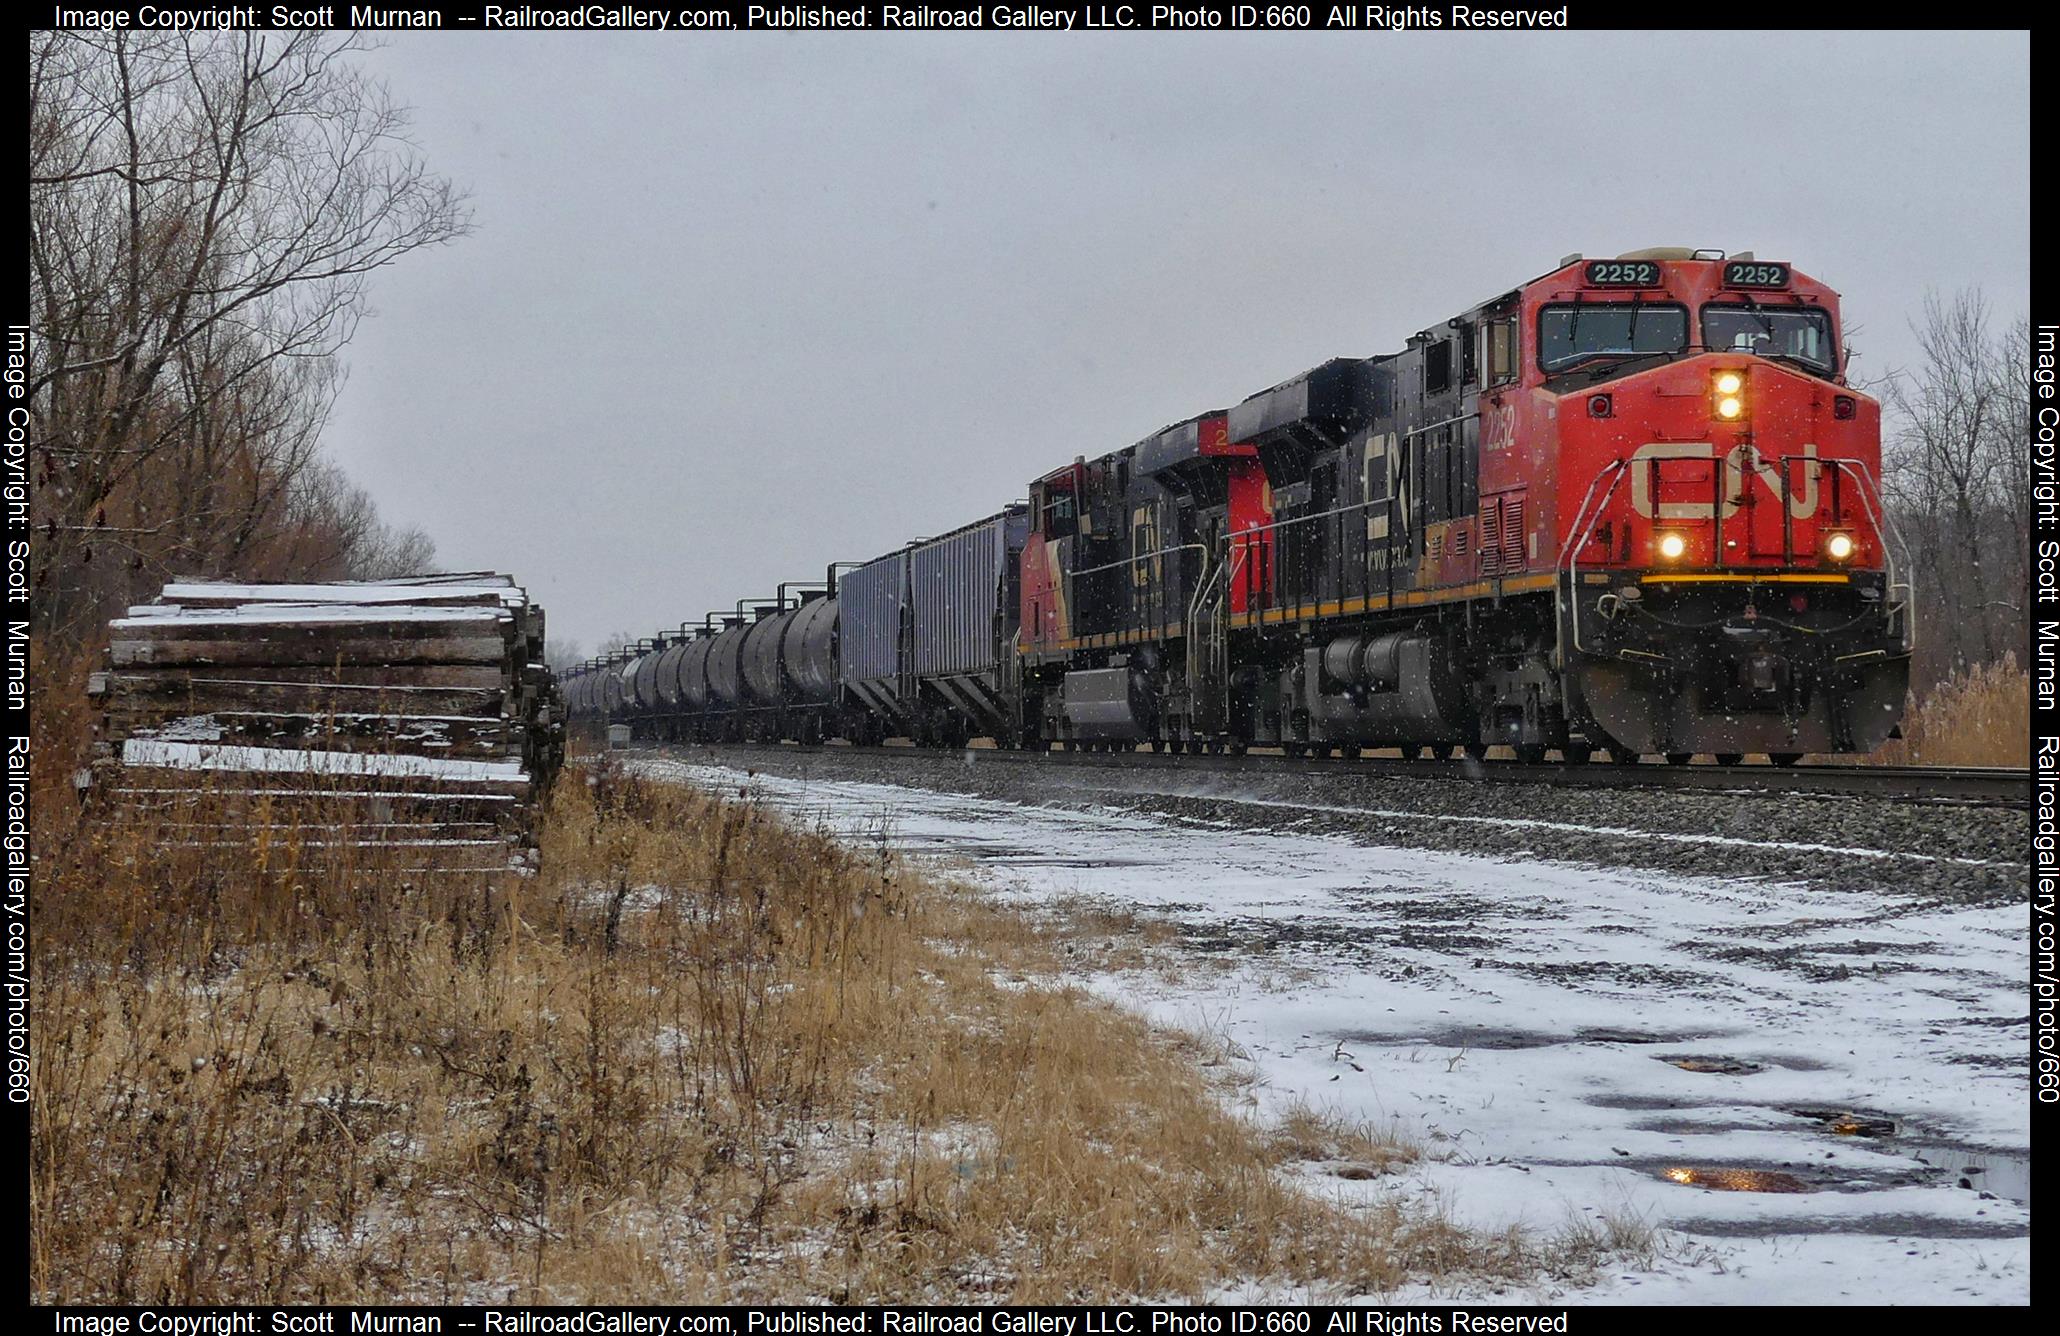 CN 2252 is a class GE ES44DC and  is pictured in Macedon, New York, United States.  This was taken along the Rochester Subdivision  on the CSX Transportation. Photo Copyright: Scott  Murnan  uploaded to Railroad Gallery on 02/01/2023. This photograph of CN 2252 was taken on Monday, January 30, 2023. All Rights Reserved. 